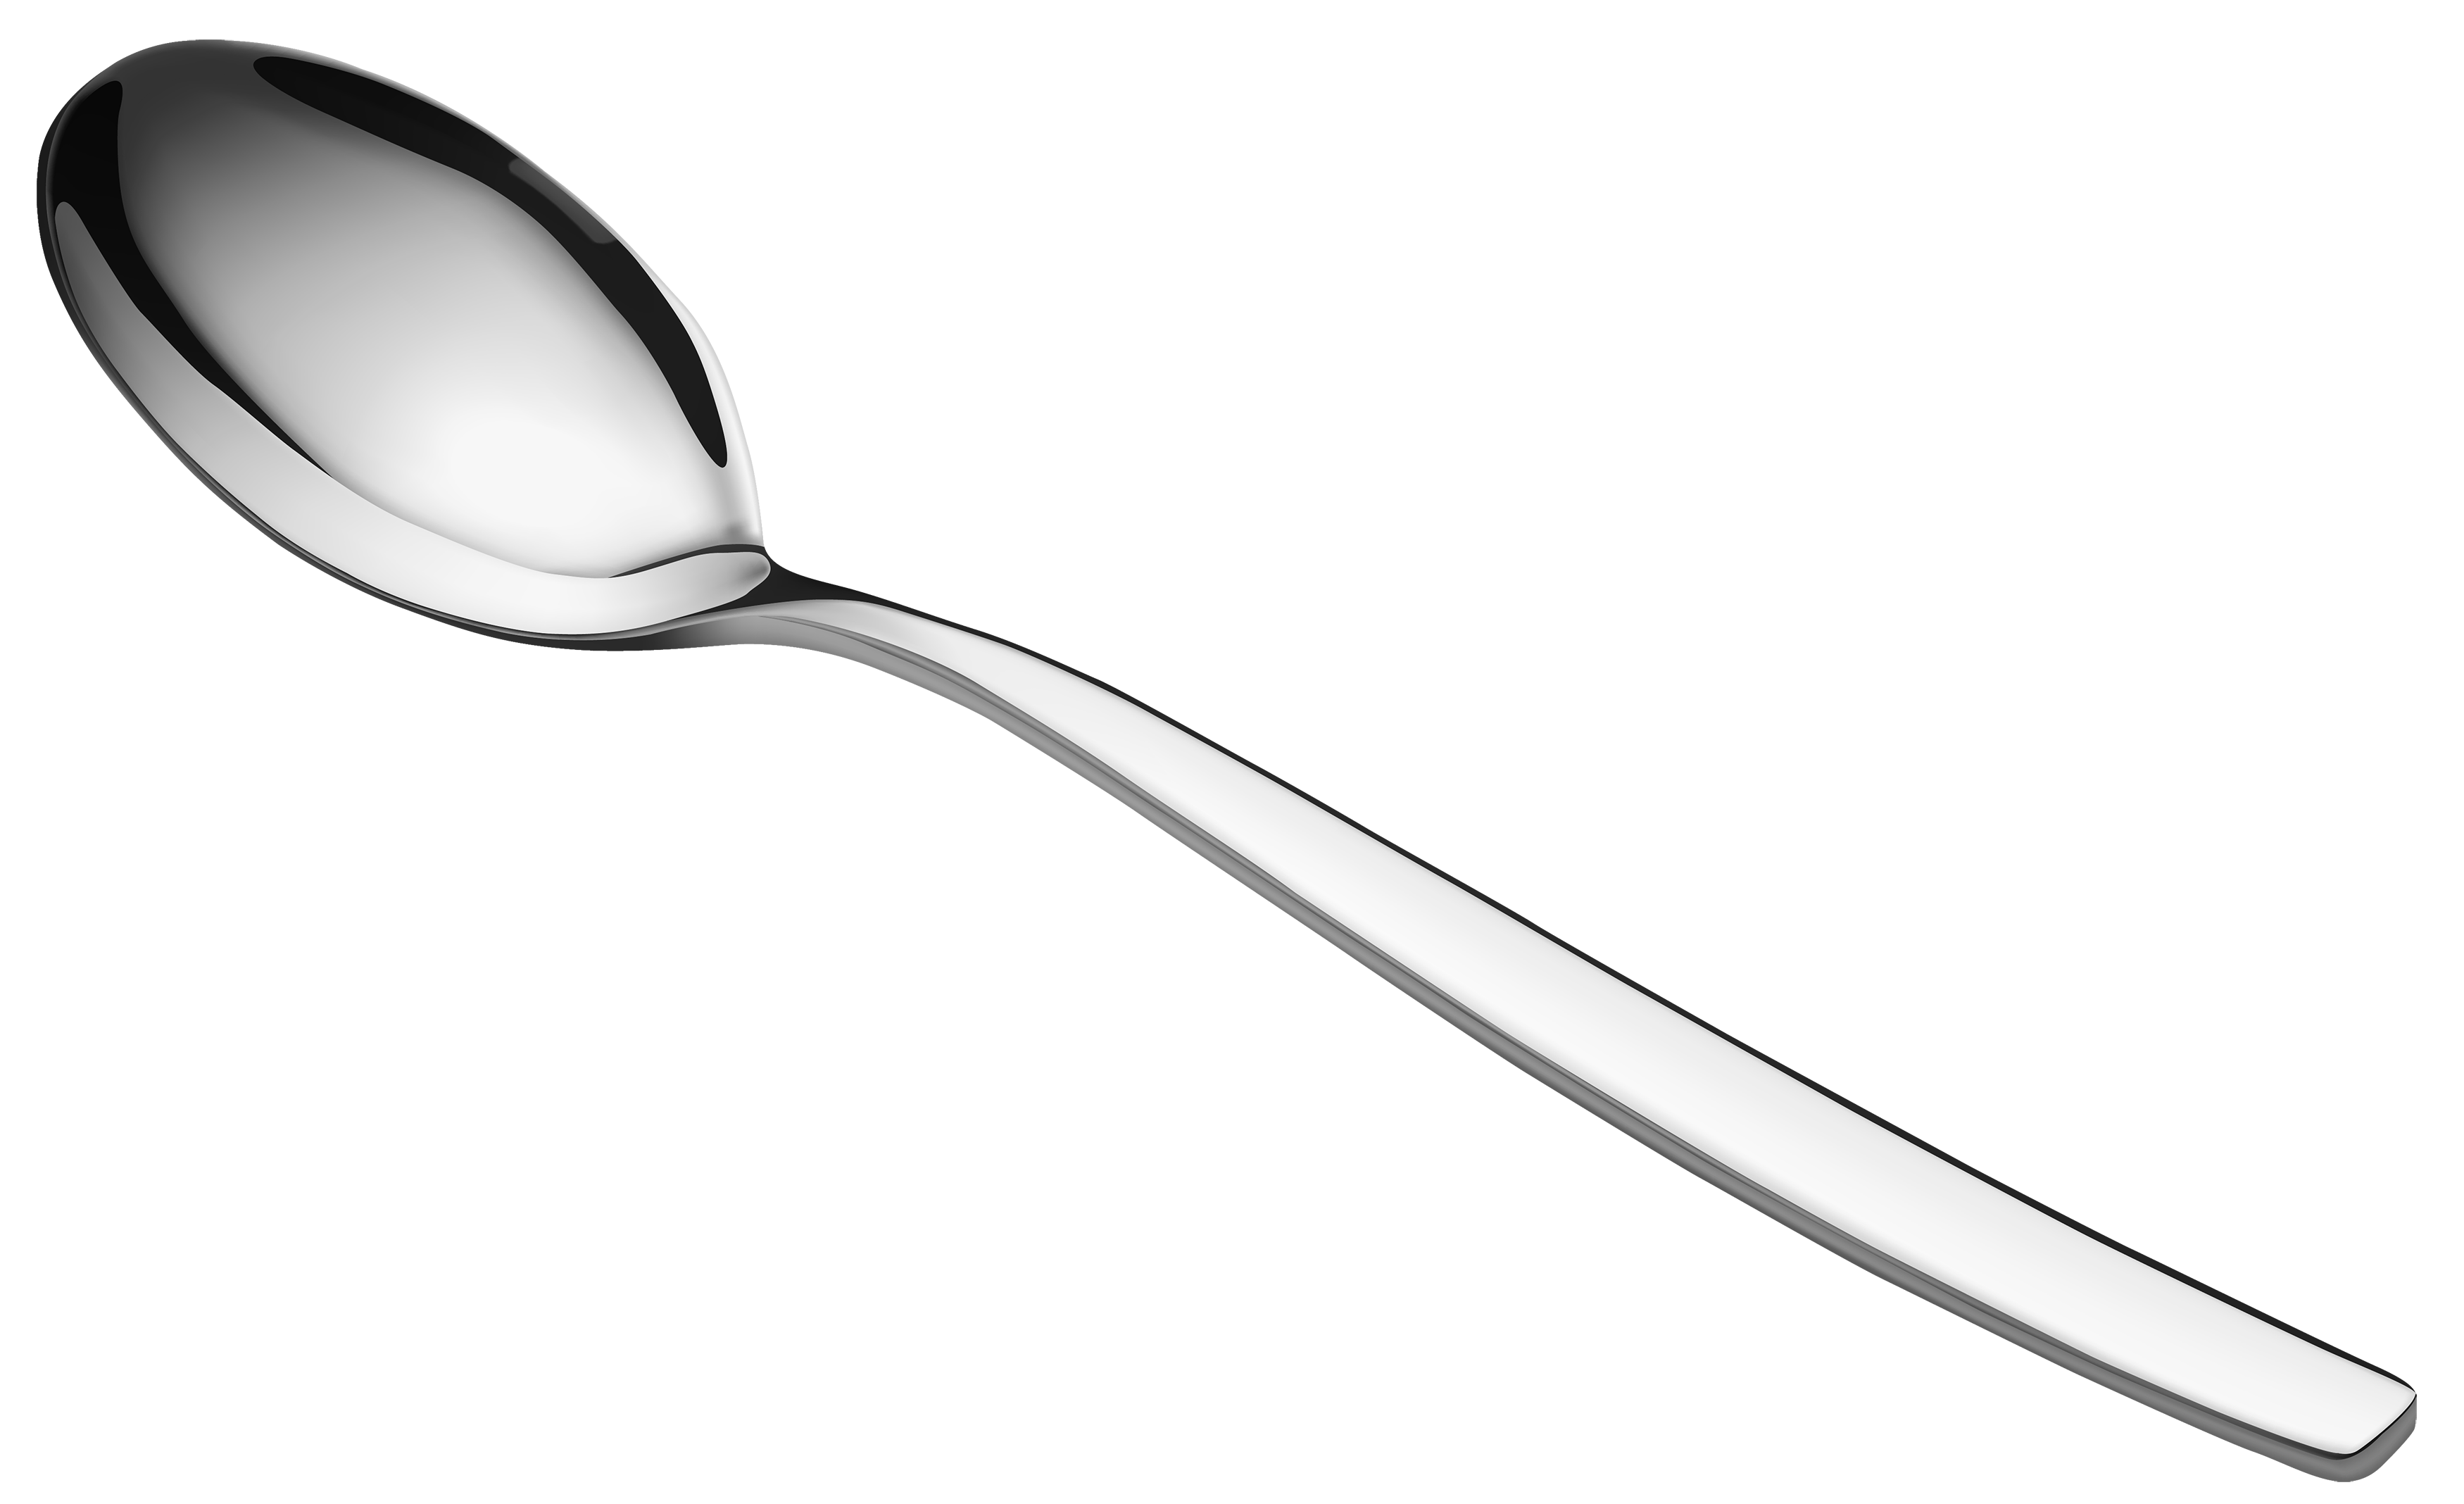 https://pluspng.com/img-png/spoon-png-hd-png-file-name-silver-spoon-pluspng...